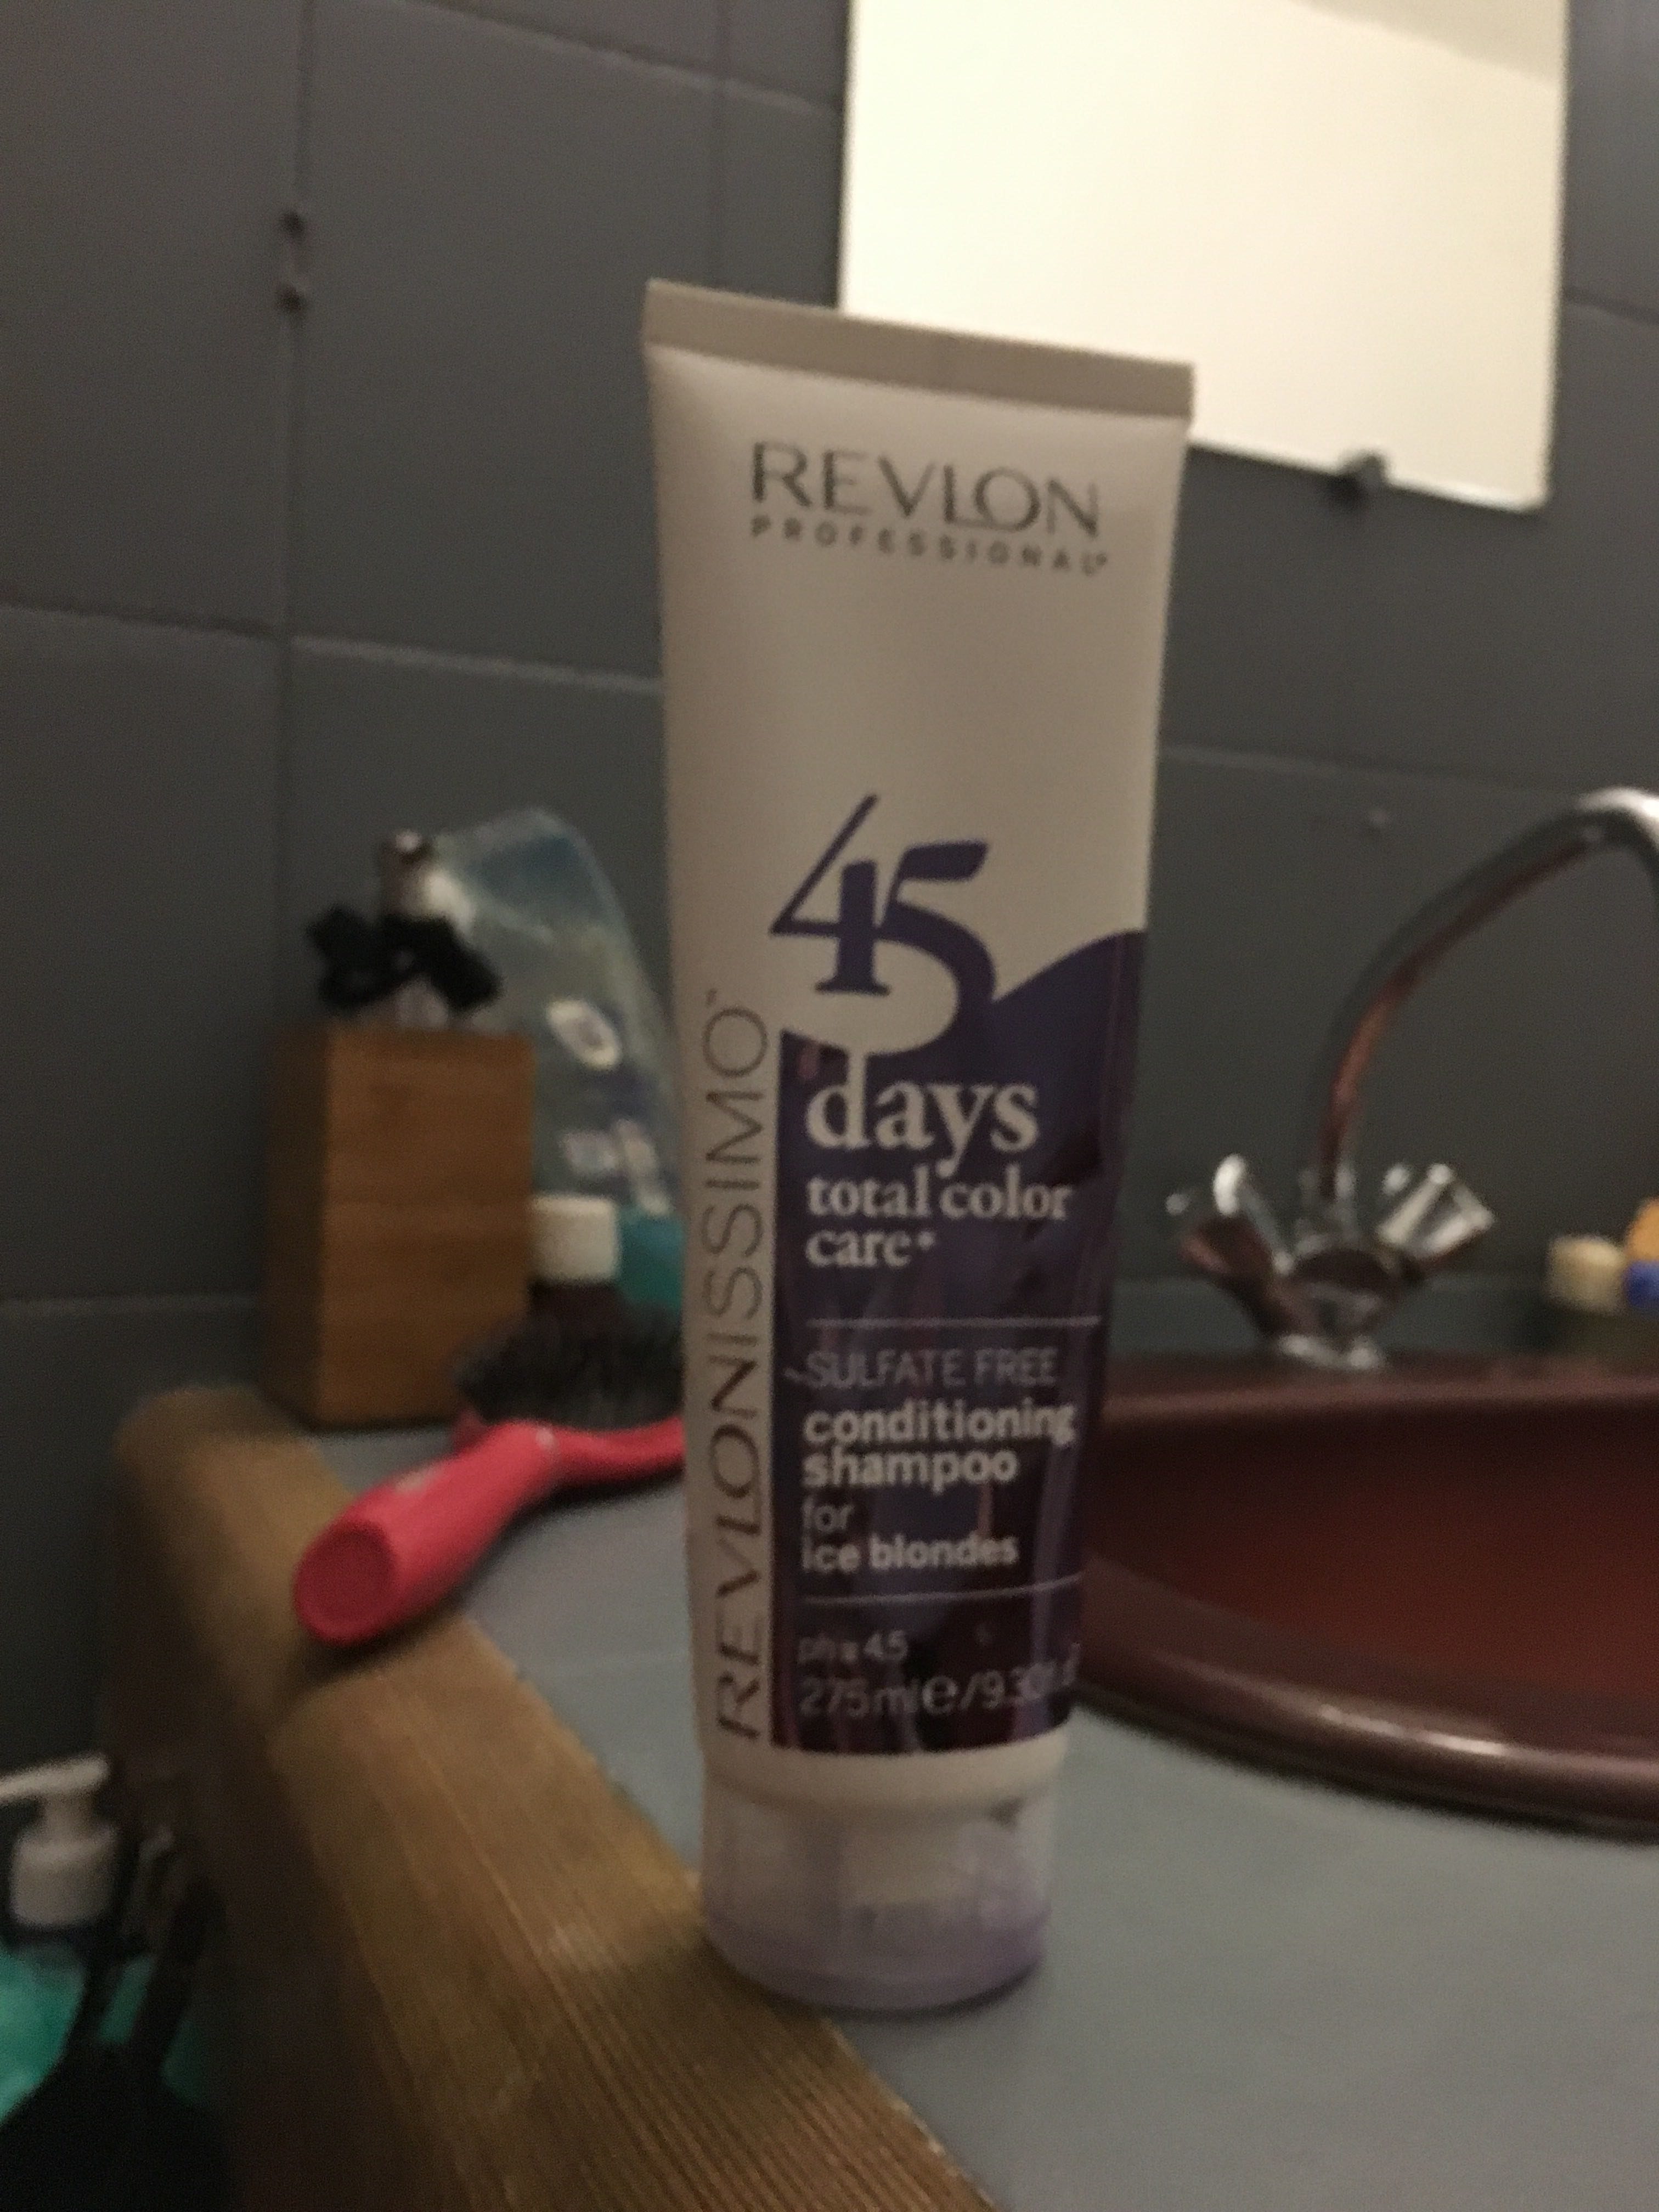 45 days total color care for ice blondes - Produto - fr